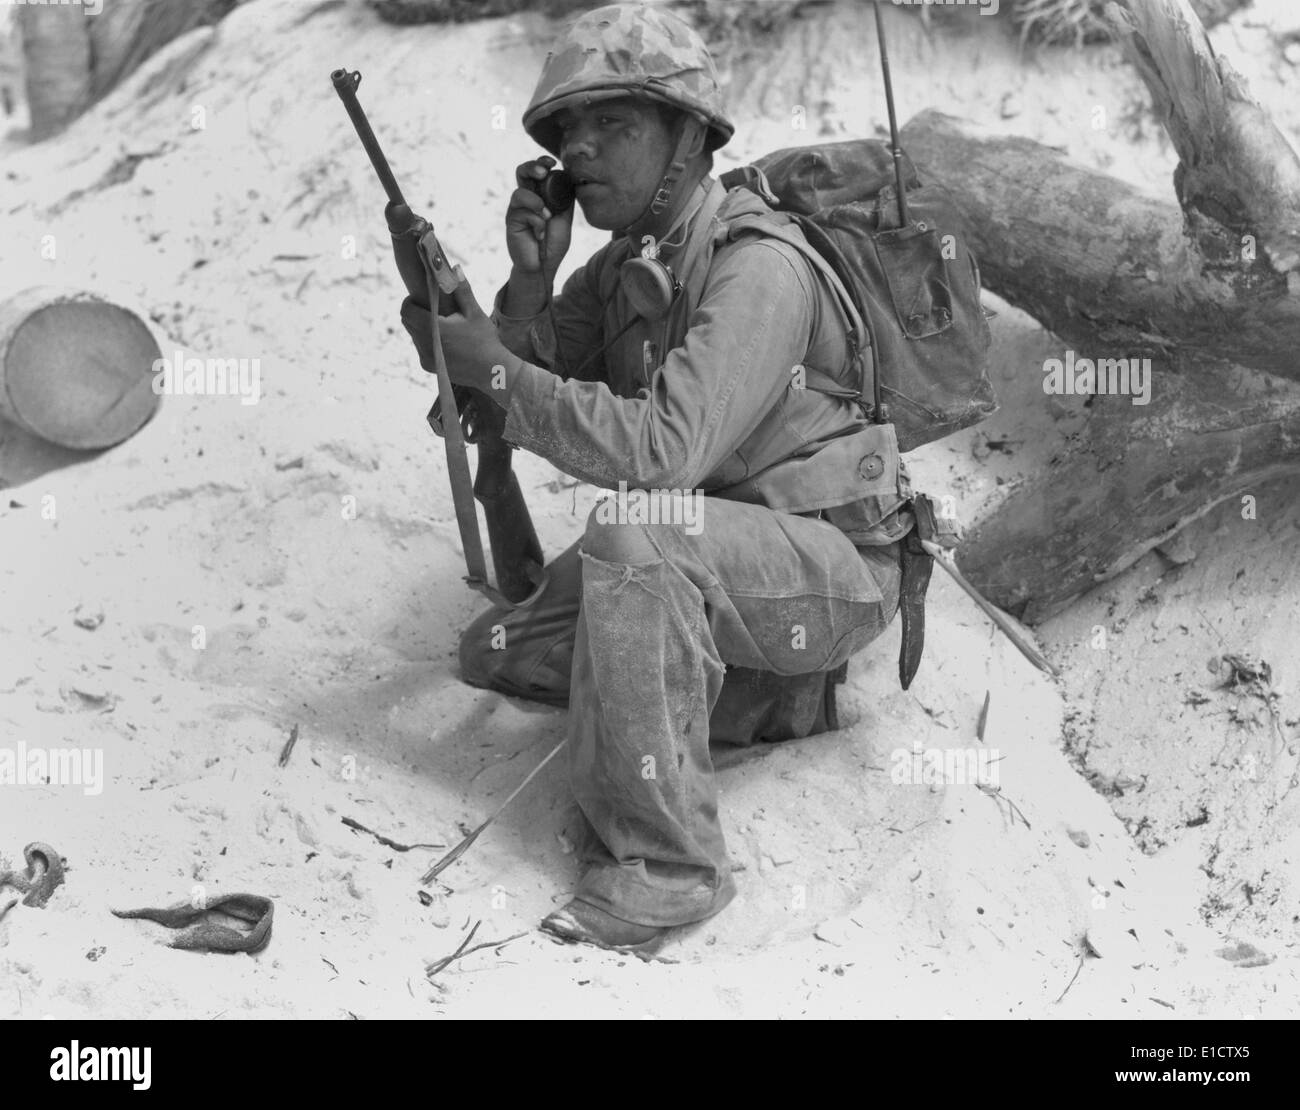 U.S. Marine Native American 'Code Talker' uses walkie-talkie in the South Pacific during World War 2. Nov. 1943. Stock Photo